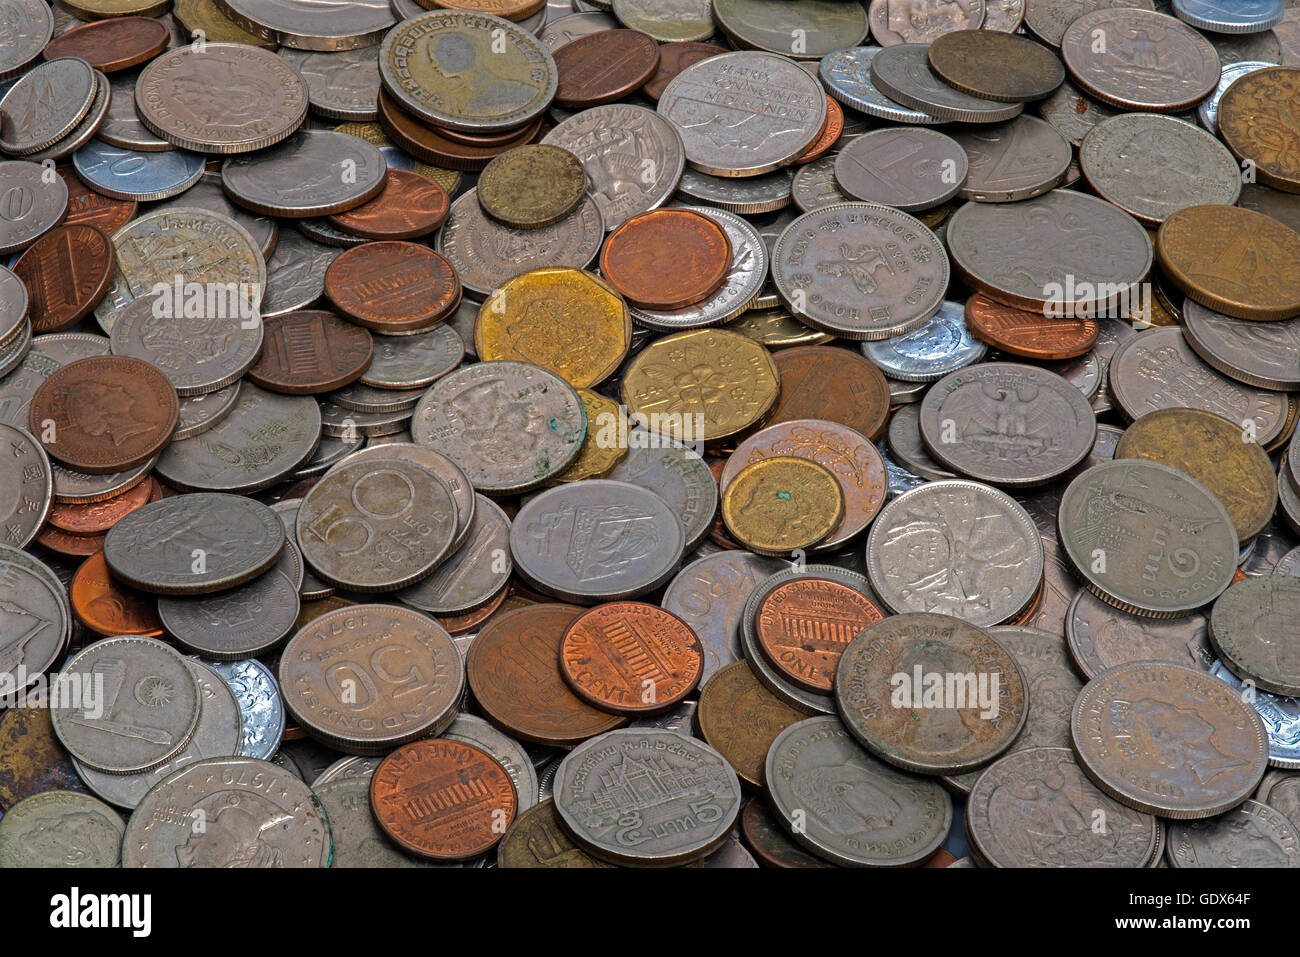 Old coins, different sizes, from different countries Stock Photo